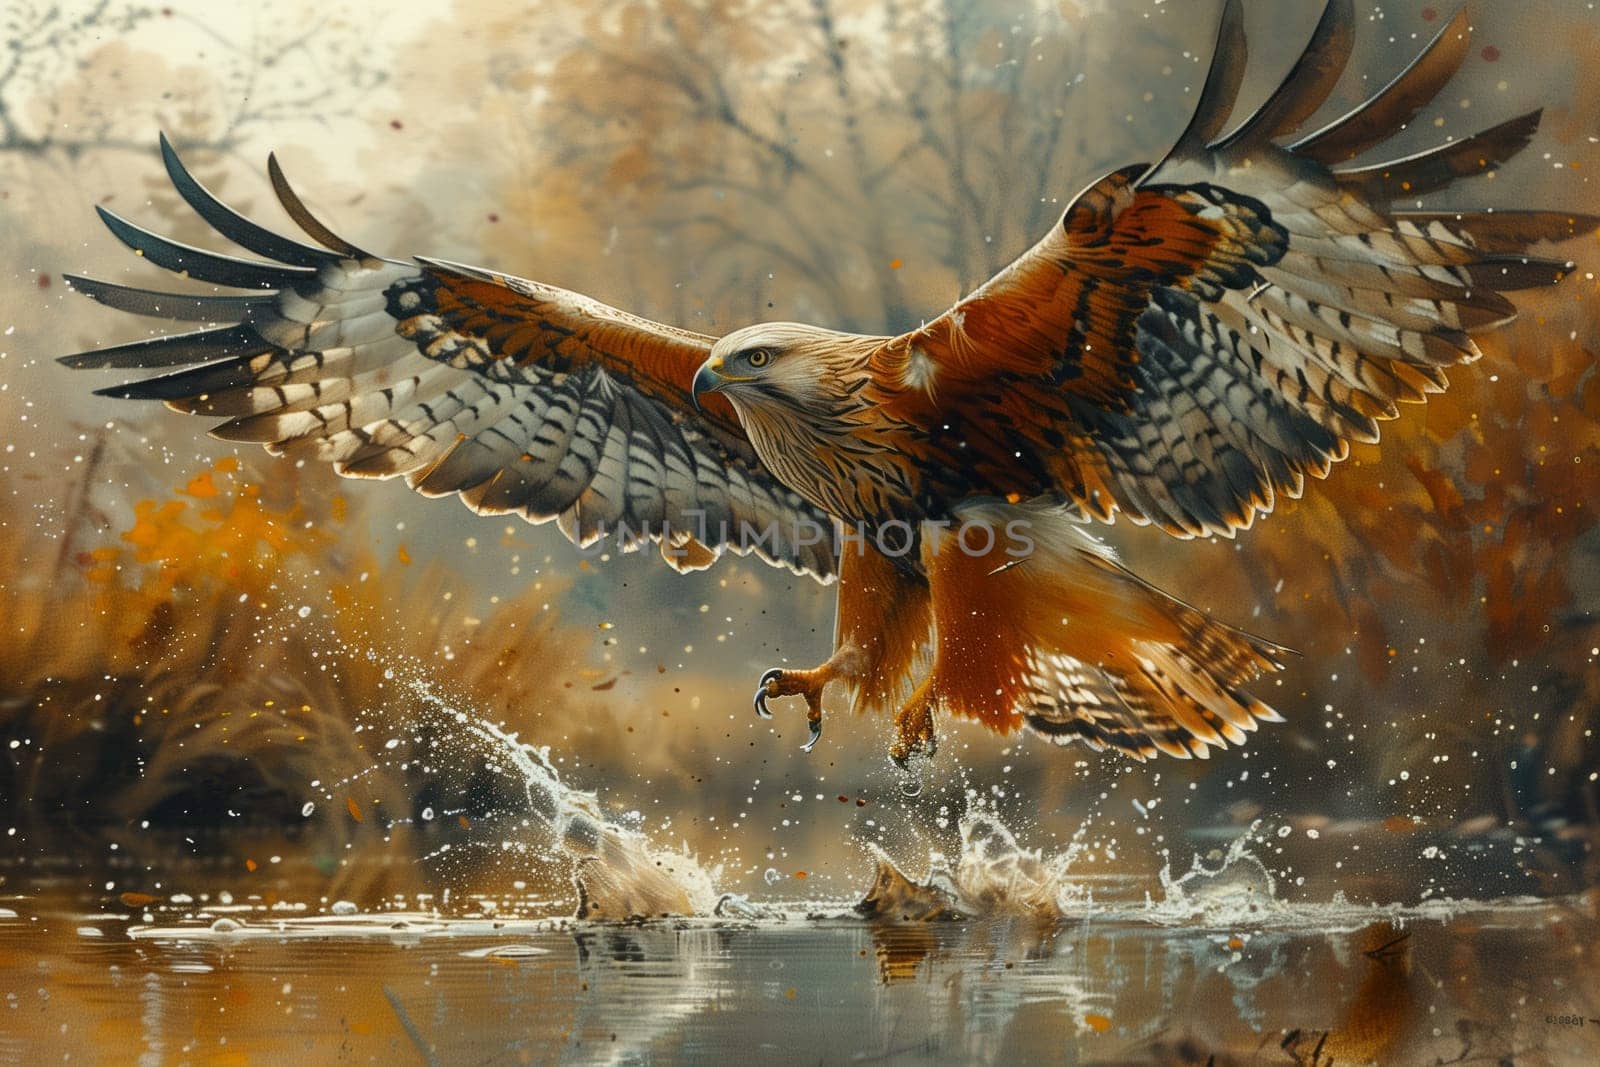 Majestic eagle soars above a body of water with powerful wings and sharp beak by richwolf